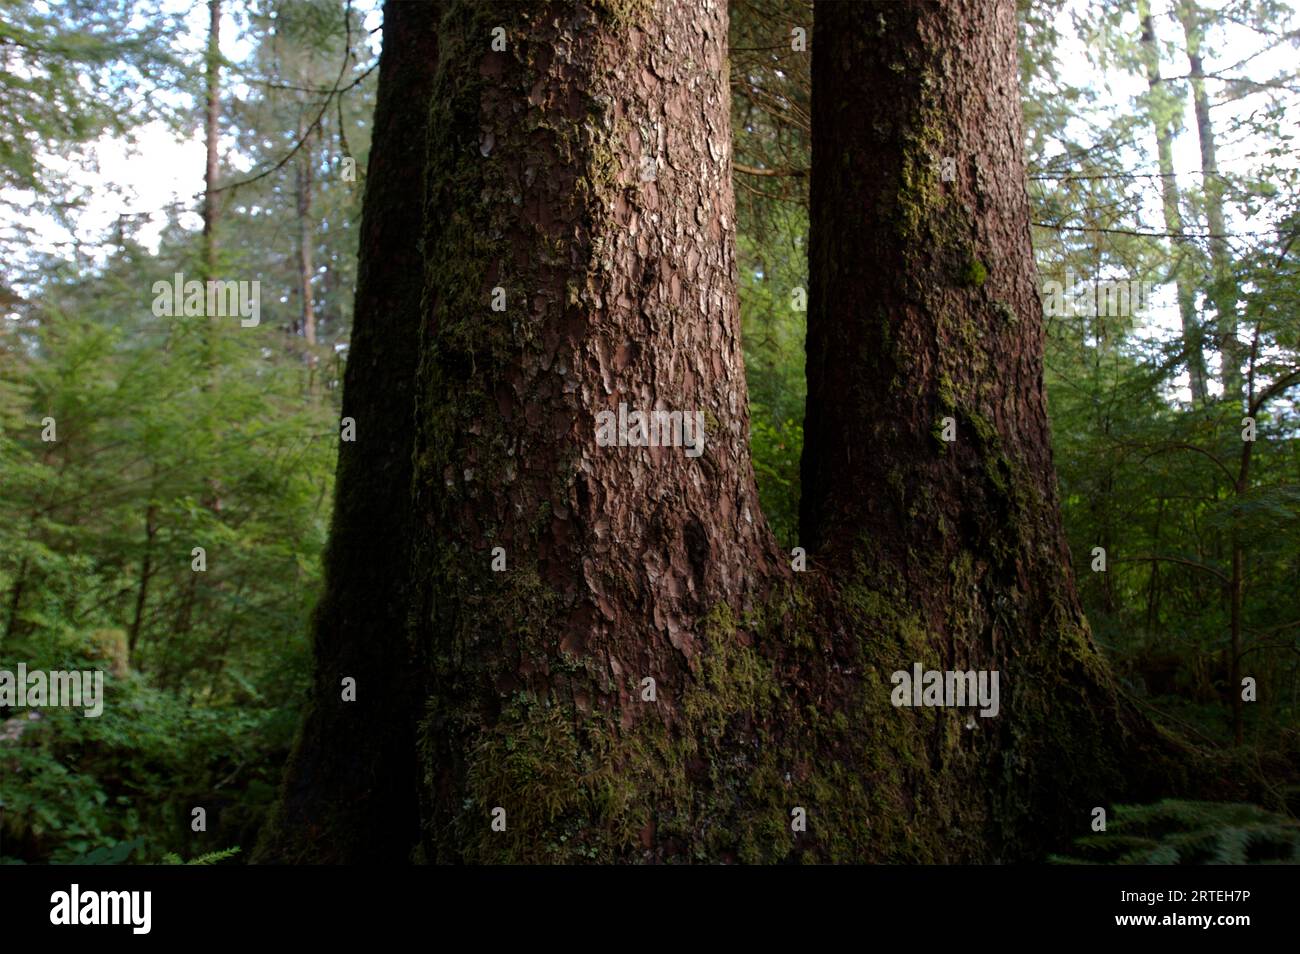 Forest of uncut old growth spruce, hemlock and cedar trees; Sitka, Alaska, United States of America Stock Photo